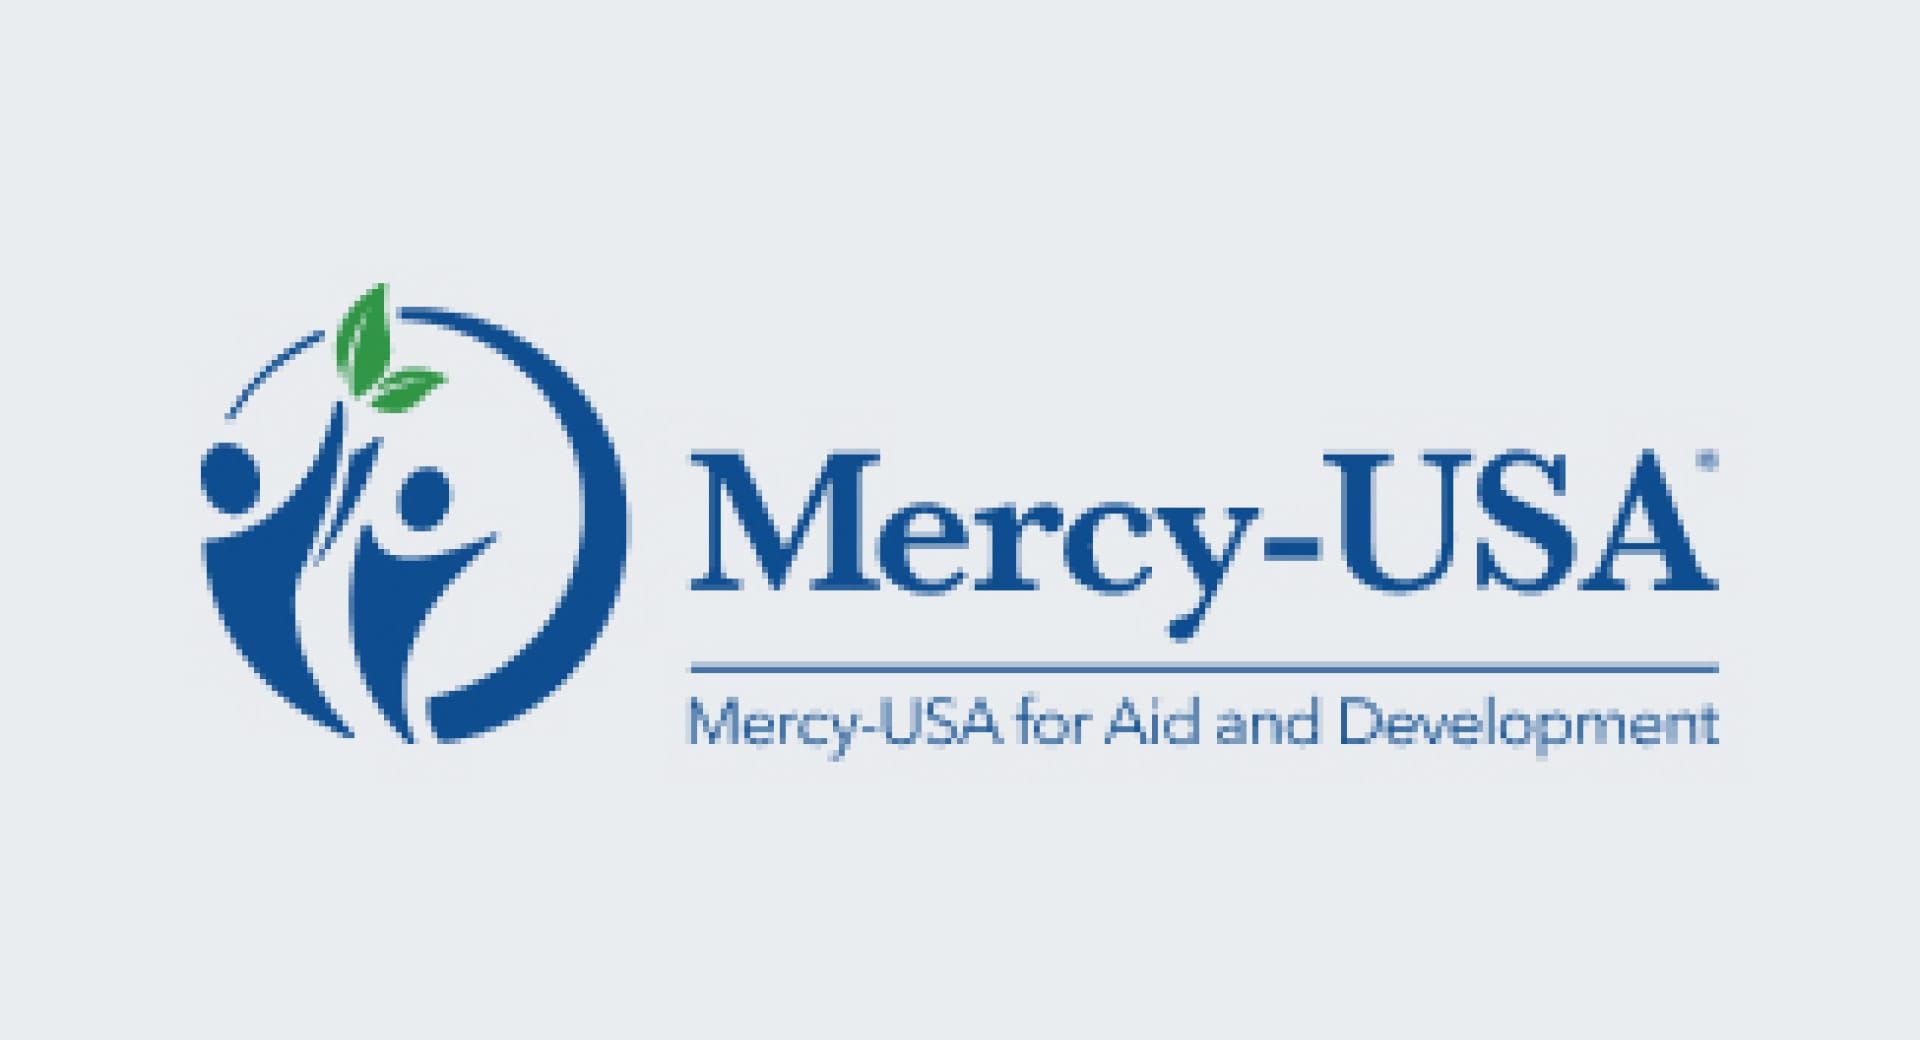 Mercy-USA staff and volunteers partner with General Motors MENA group to distribute toys to refugee children for Eid